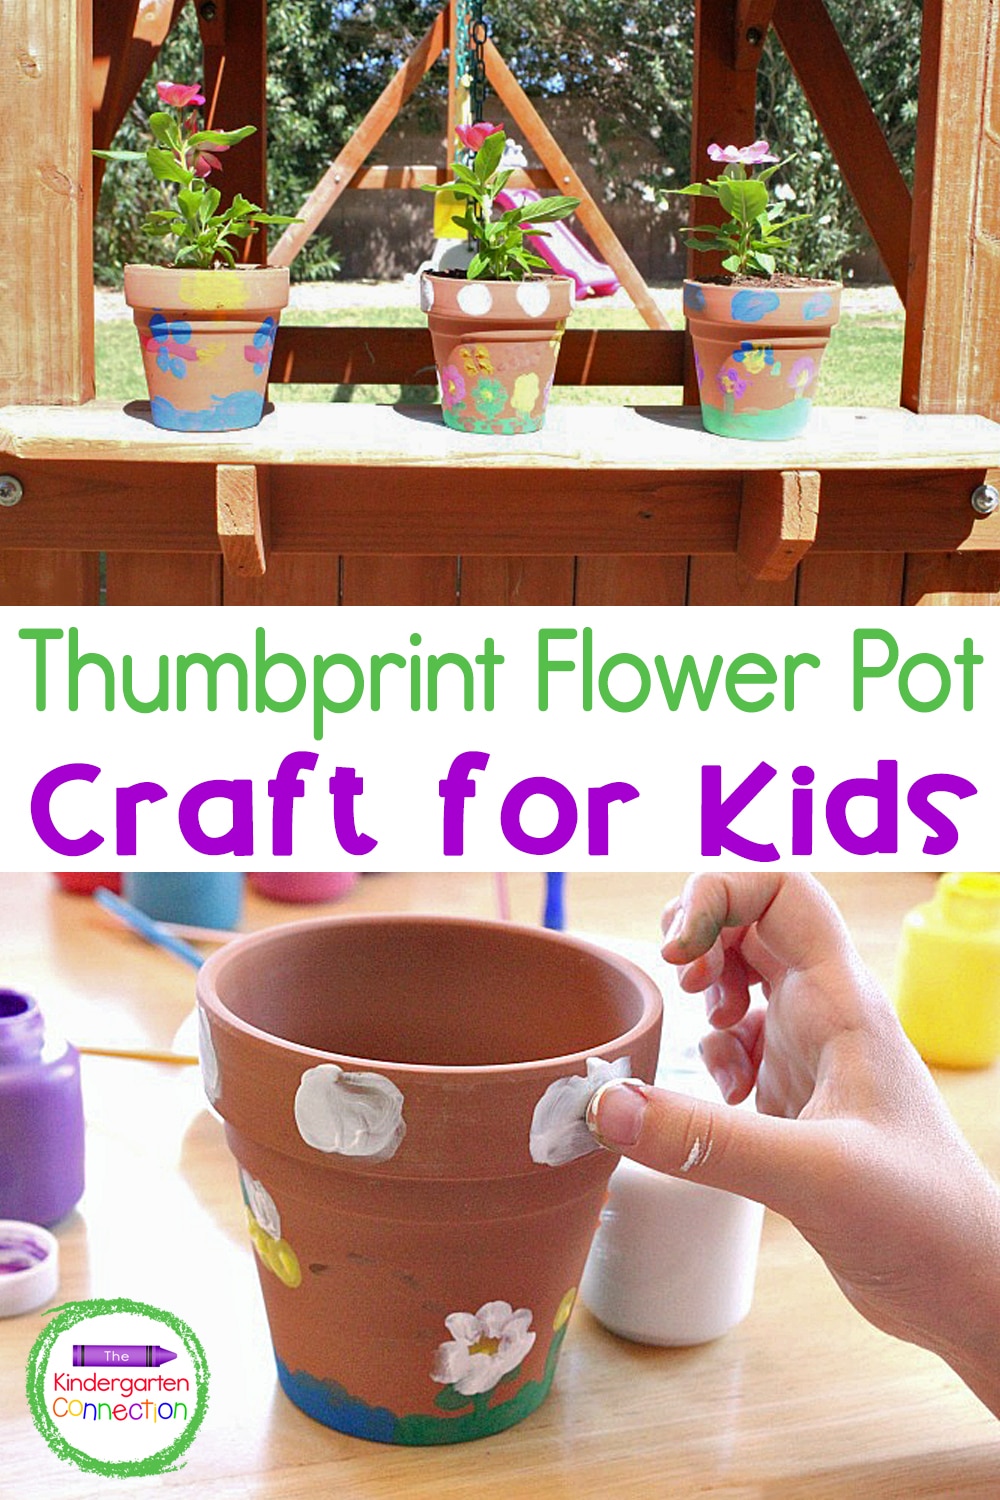 This Thumbprint Flower Pot Craft is a perfect spring or summer art activity for kids, and makes an excellent Mother's Day gift as well!